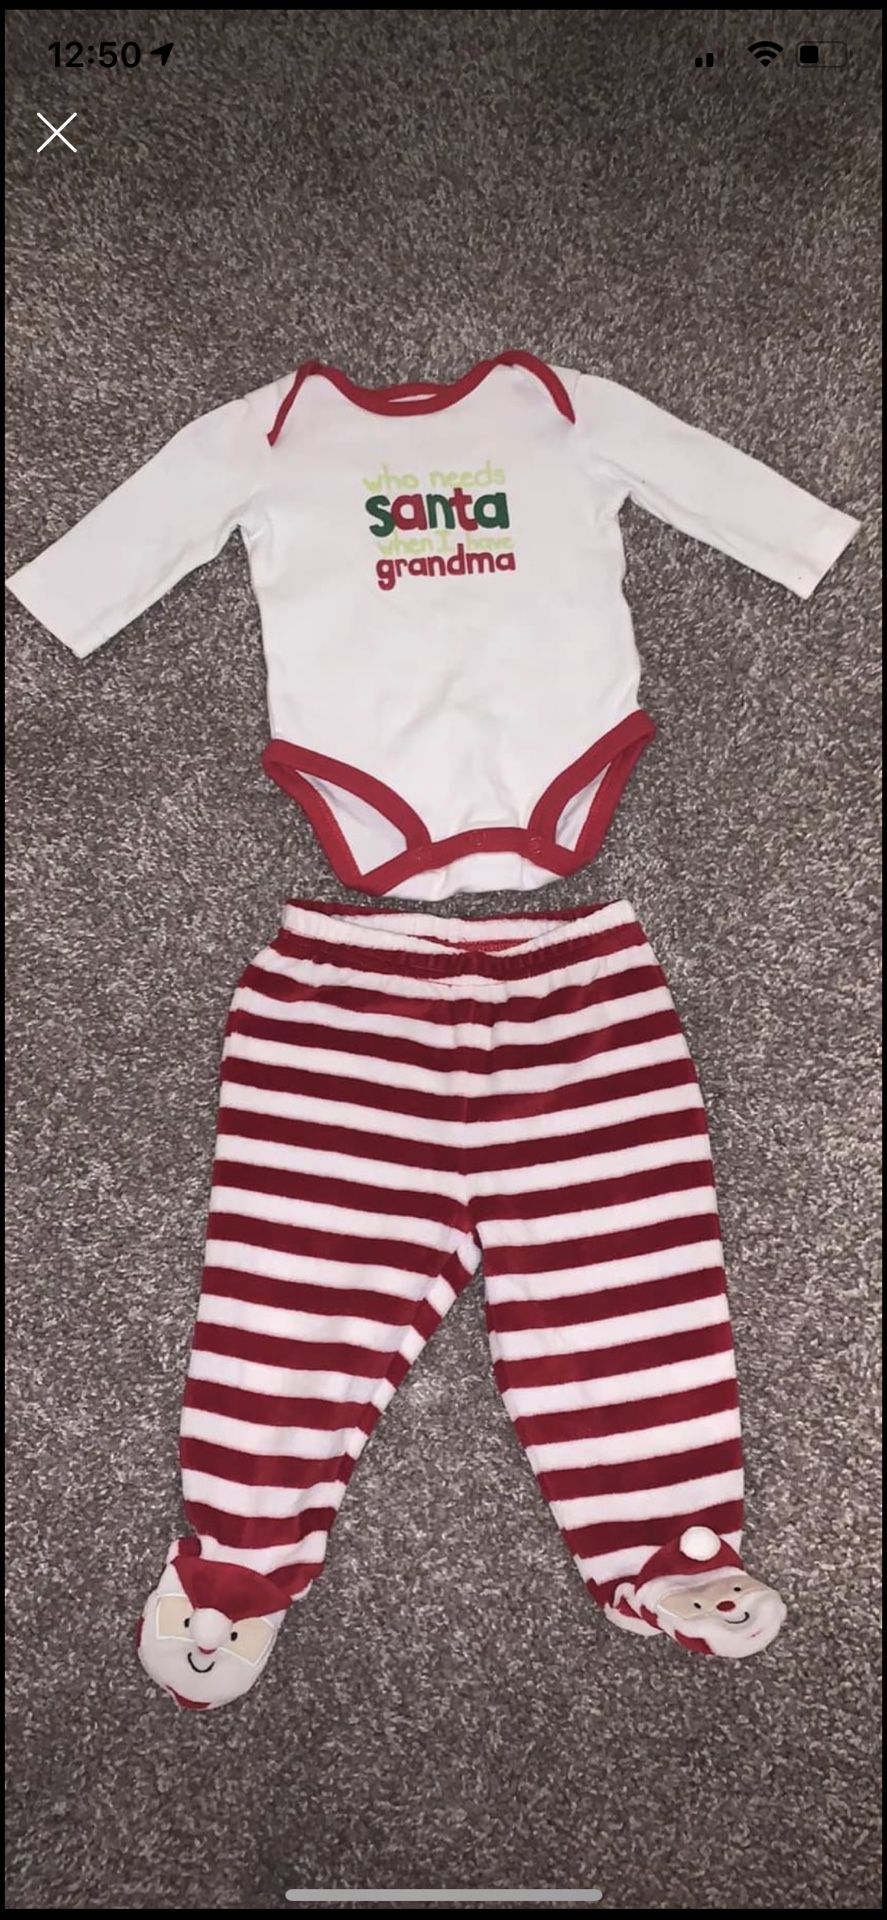 Baby Christmas costumes Size 3M